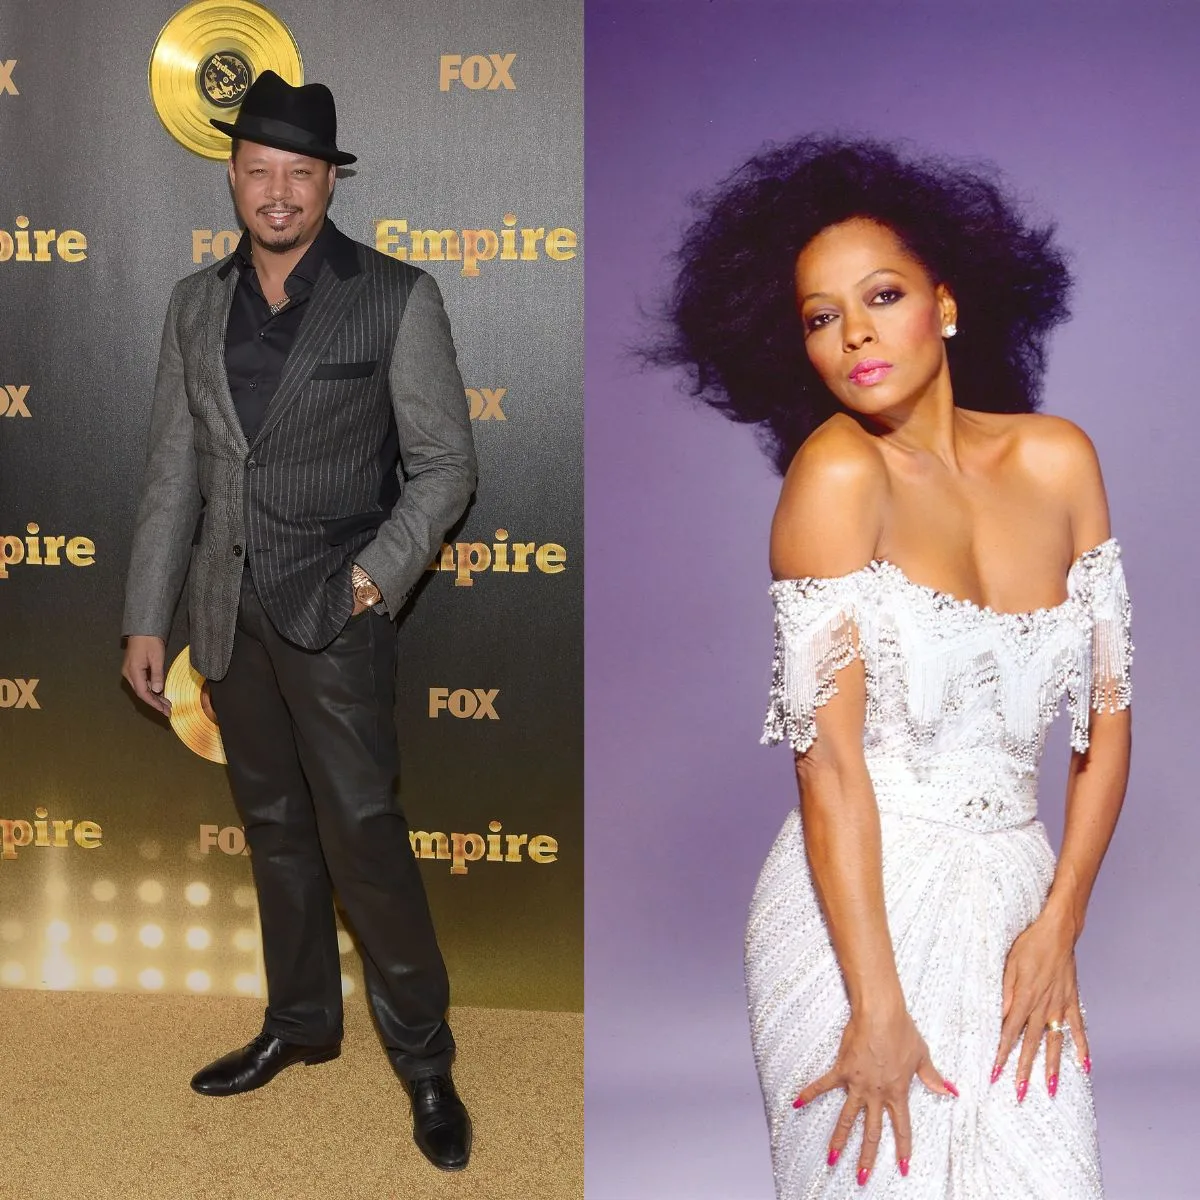 terrence howard and diana ross related